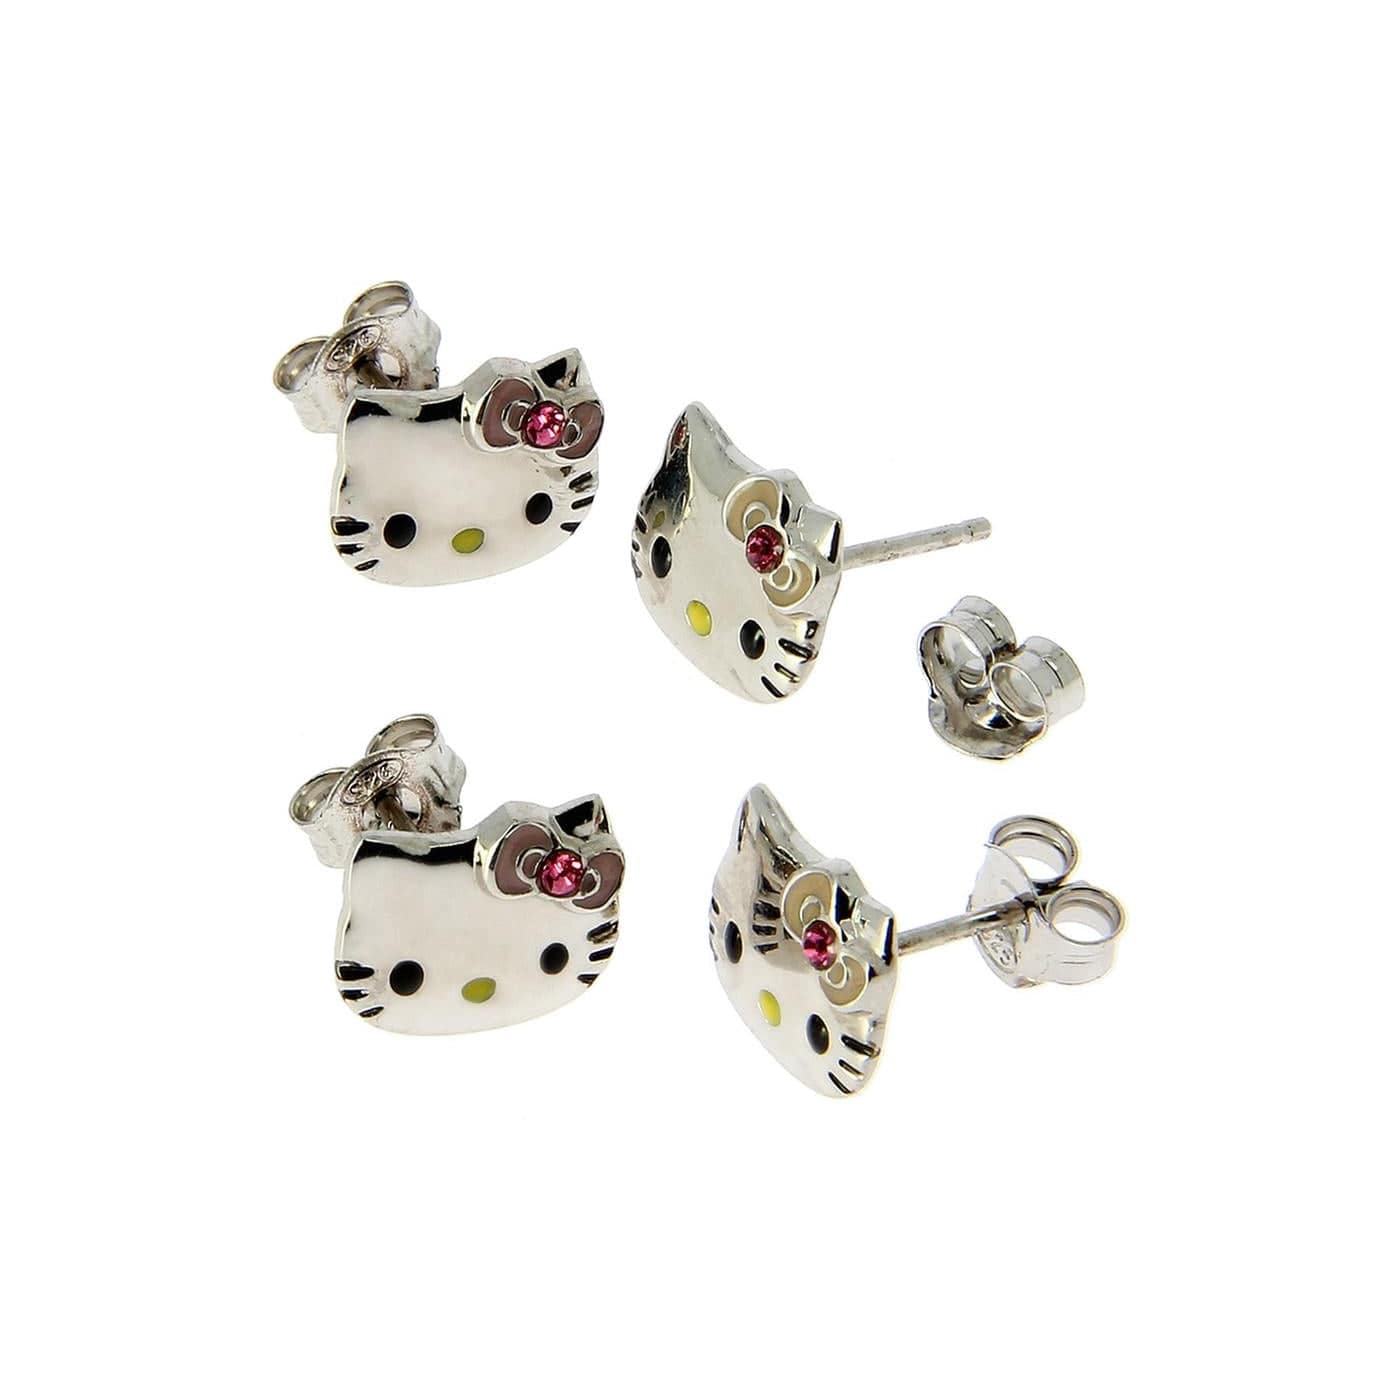 Reliancegifts Limited Hello Kitty 925 Sterling Silver Earrings Silver Bling Kawaii Gifts 51474390